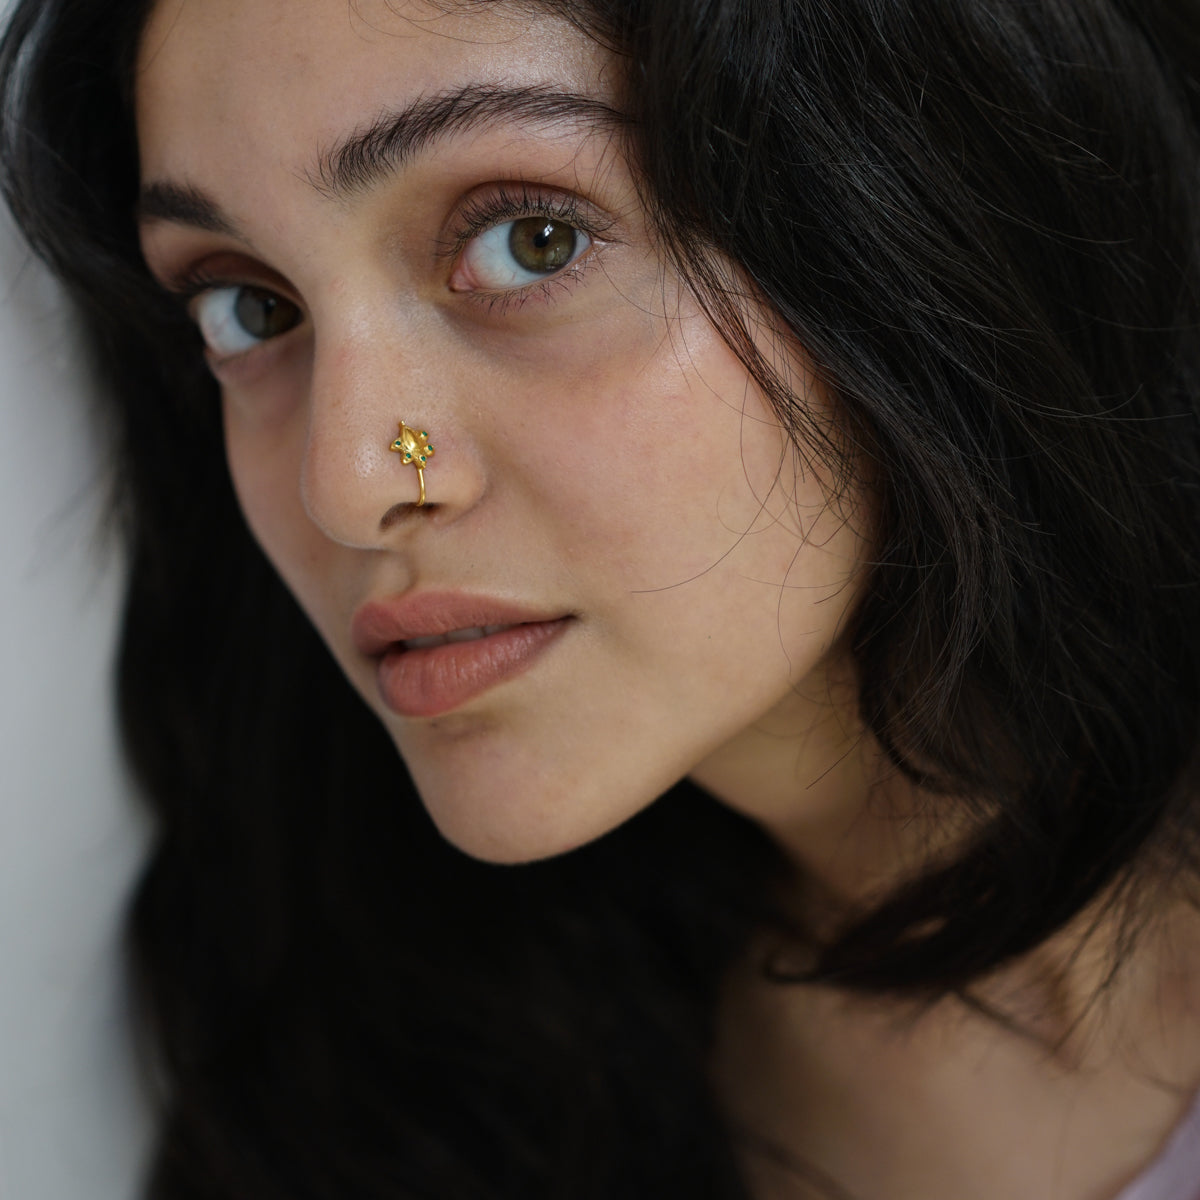 a close up of a person with a nose piercing